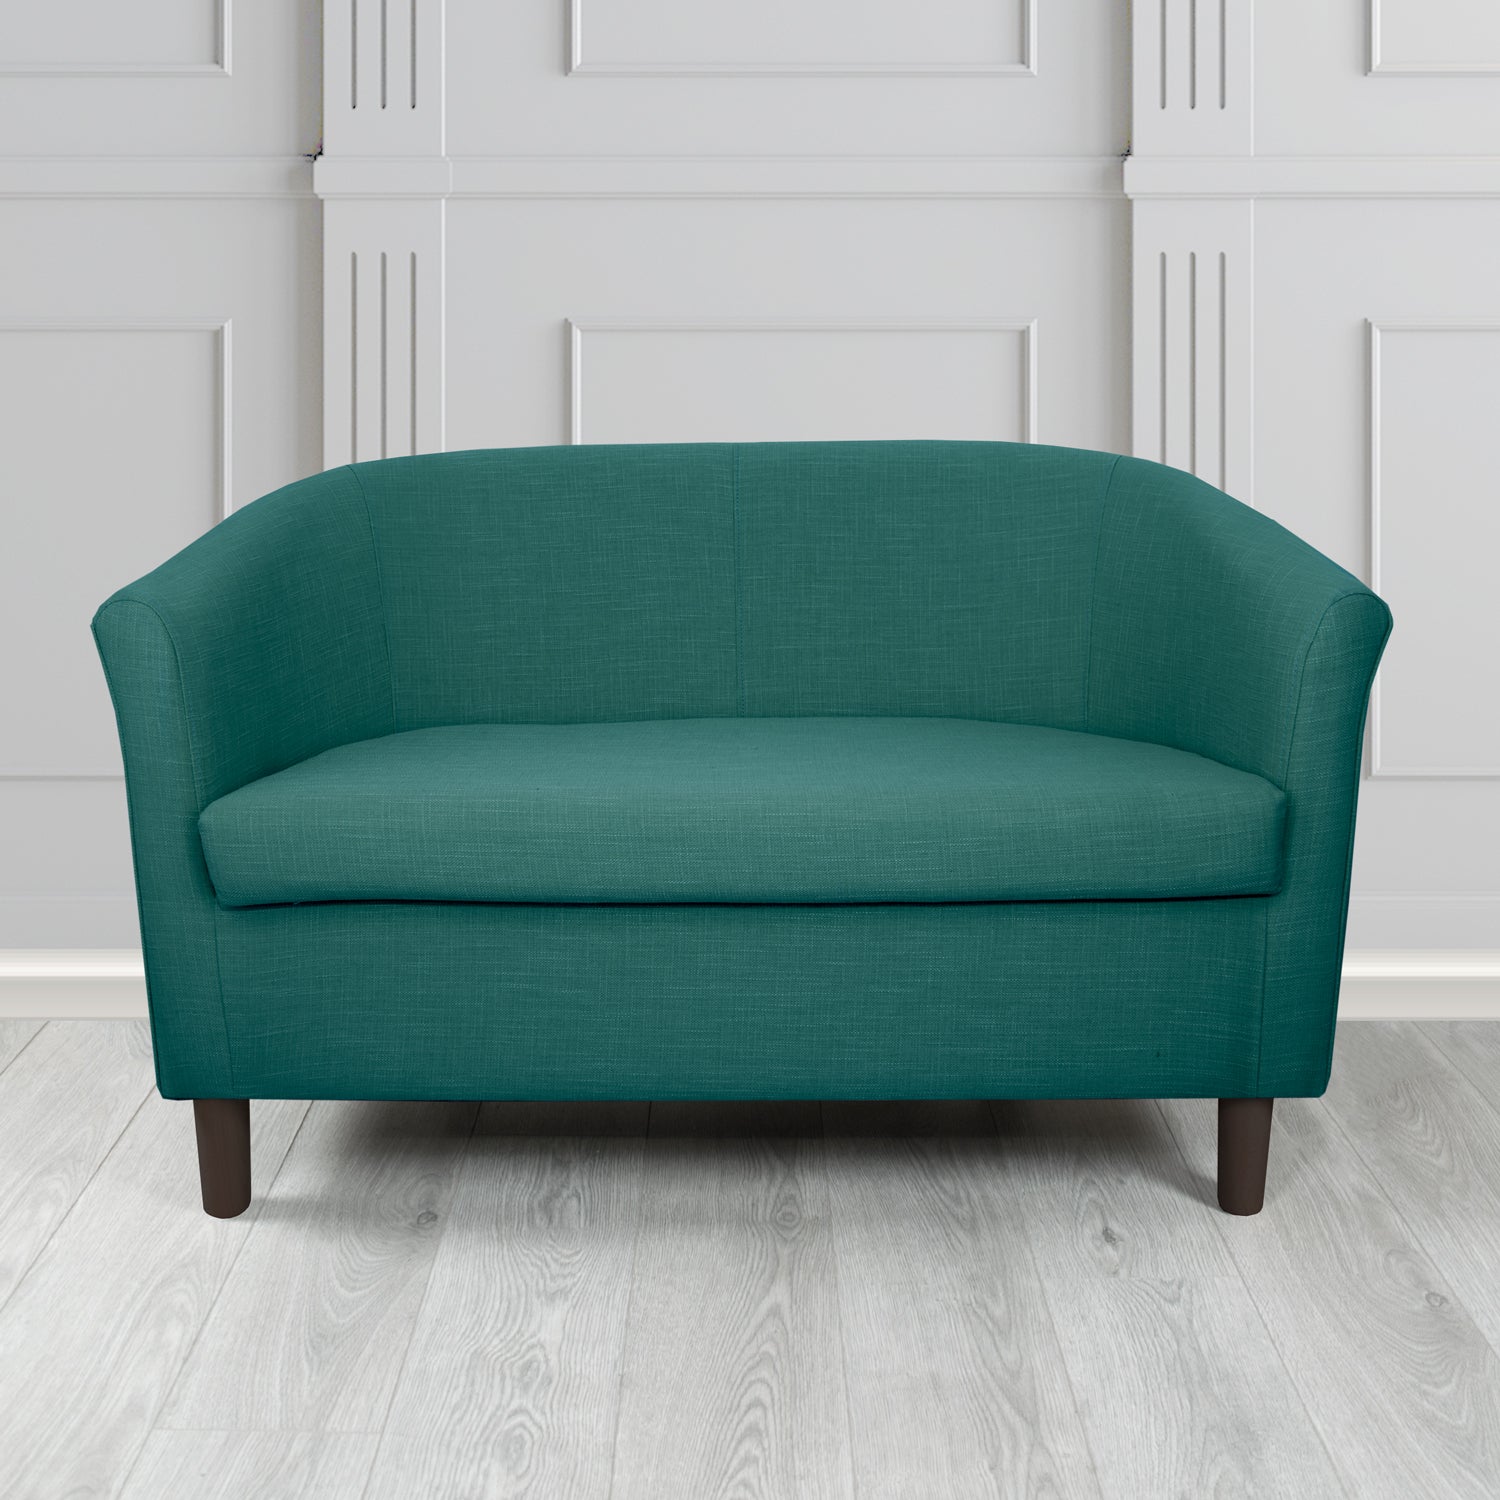 Tuscany 2 Seater Tub Sofa in Emporio Teal EMP510 Linen Crib 5 Fabric - The Tub Chair Shop